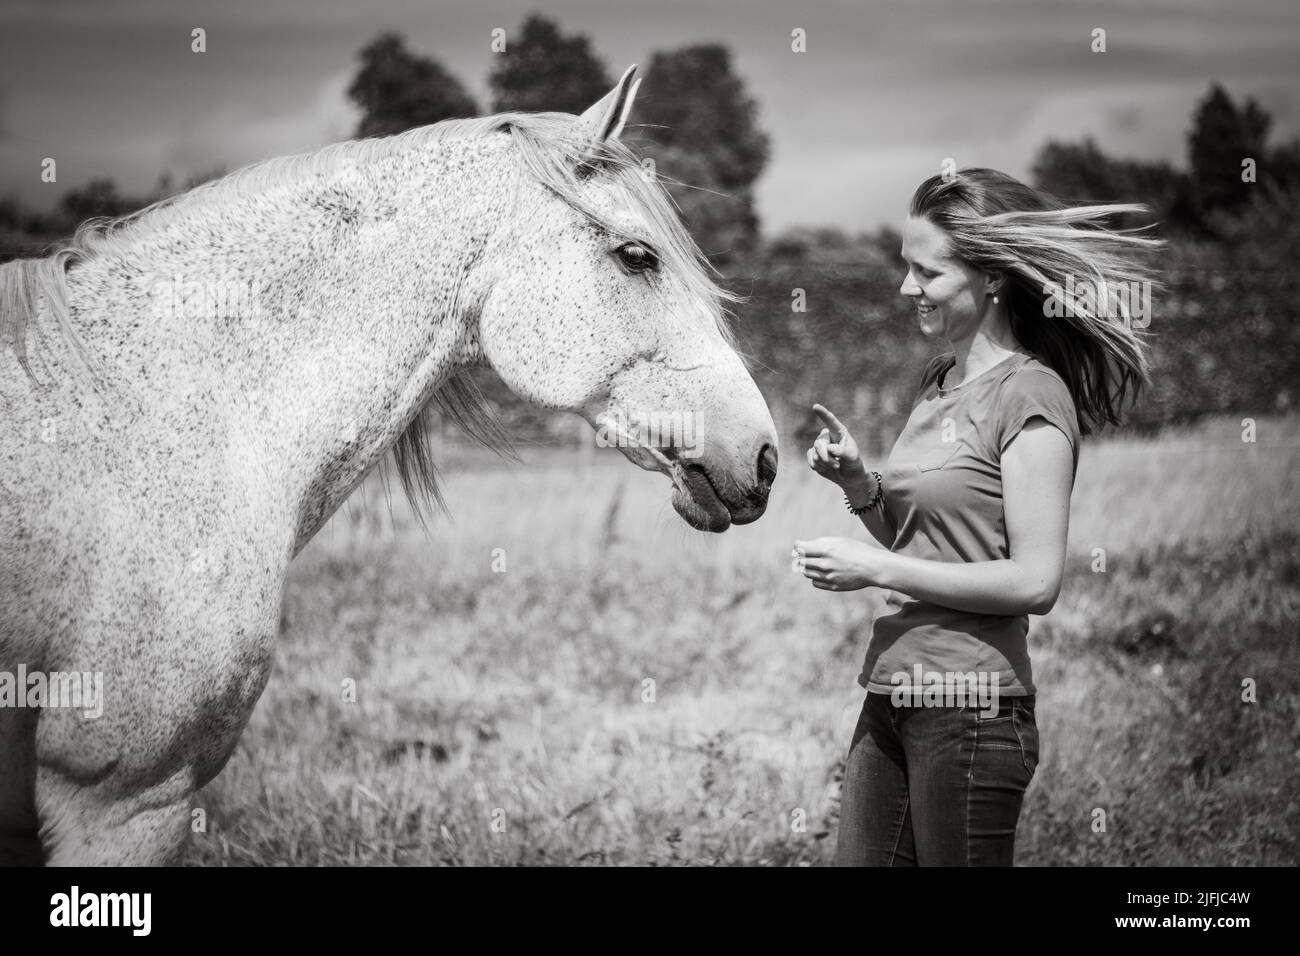 Girl with white horse, outdoors, trustful friendship, farm animals. Stock Photo